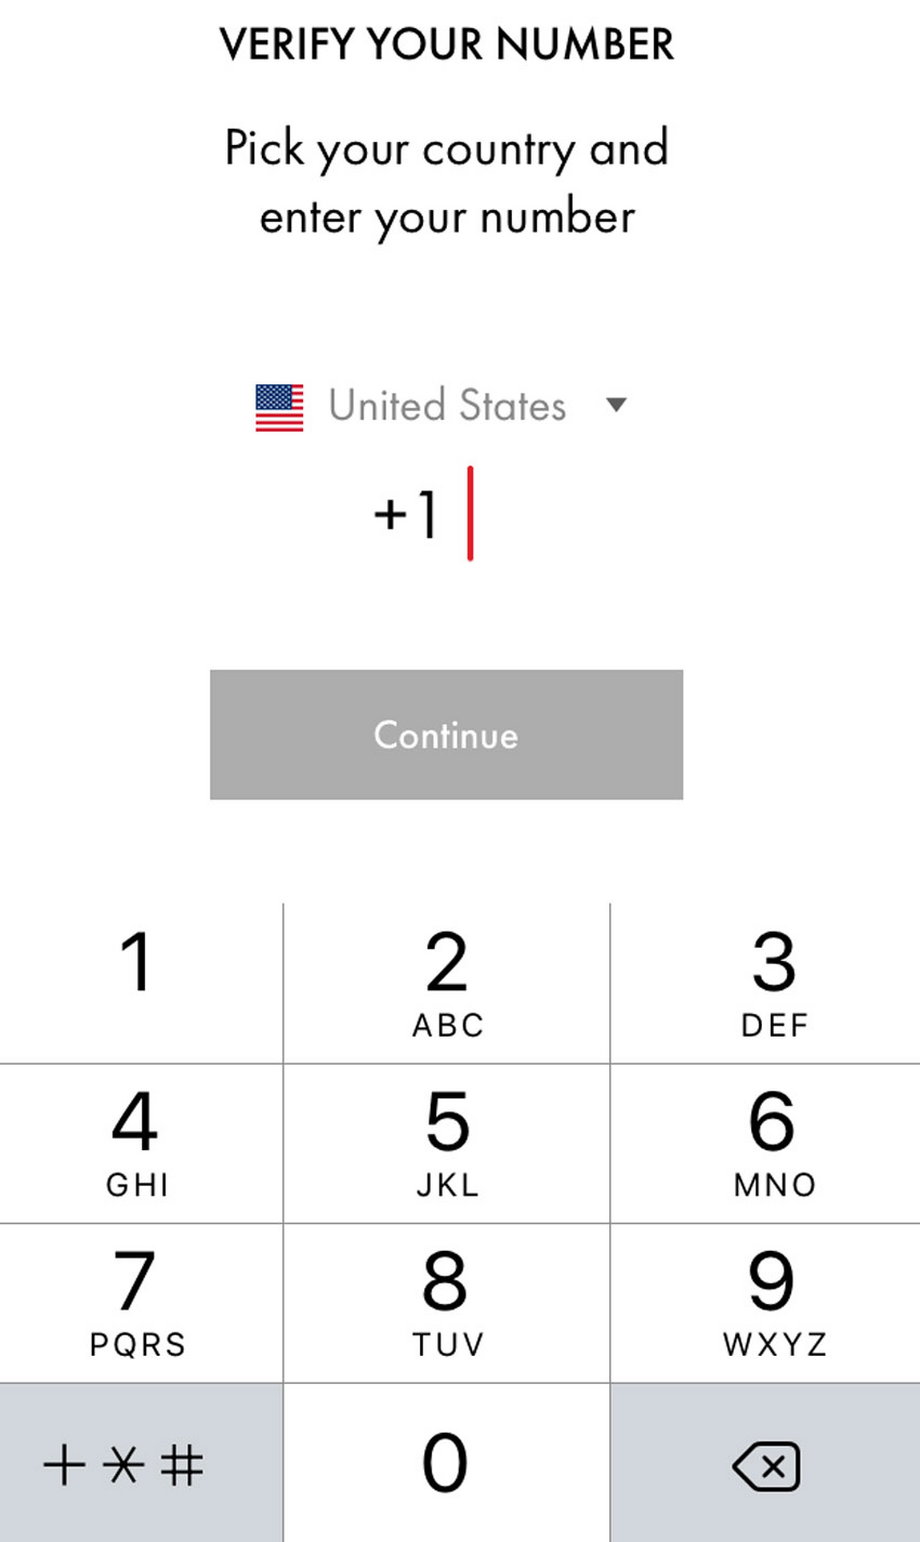 Once you download the app, you're asked to verify your number and the country you're in.